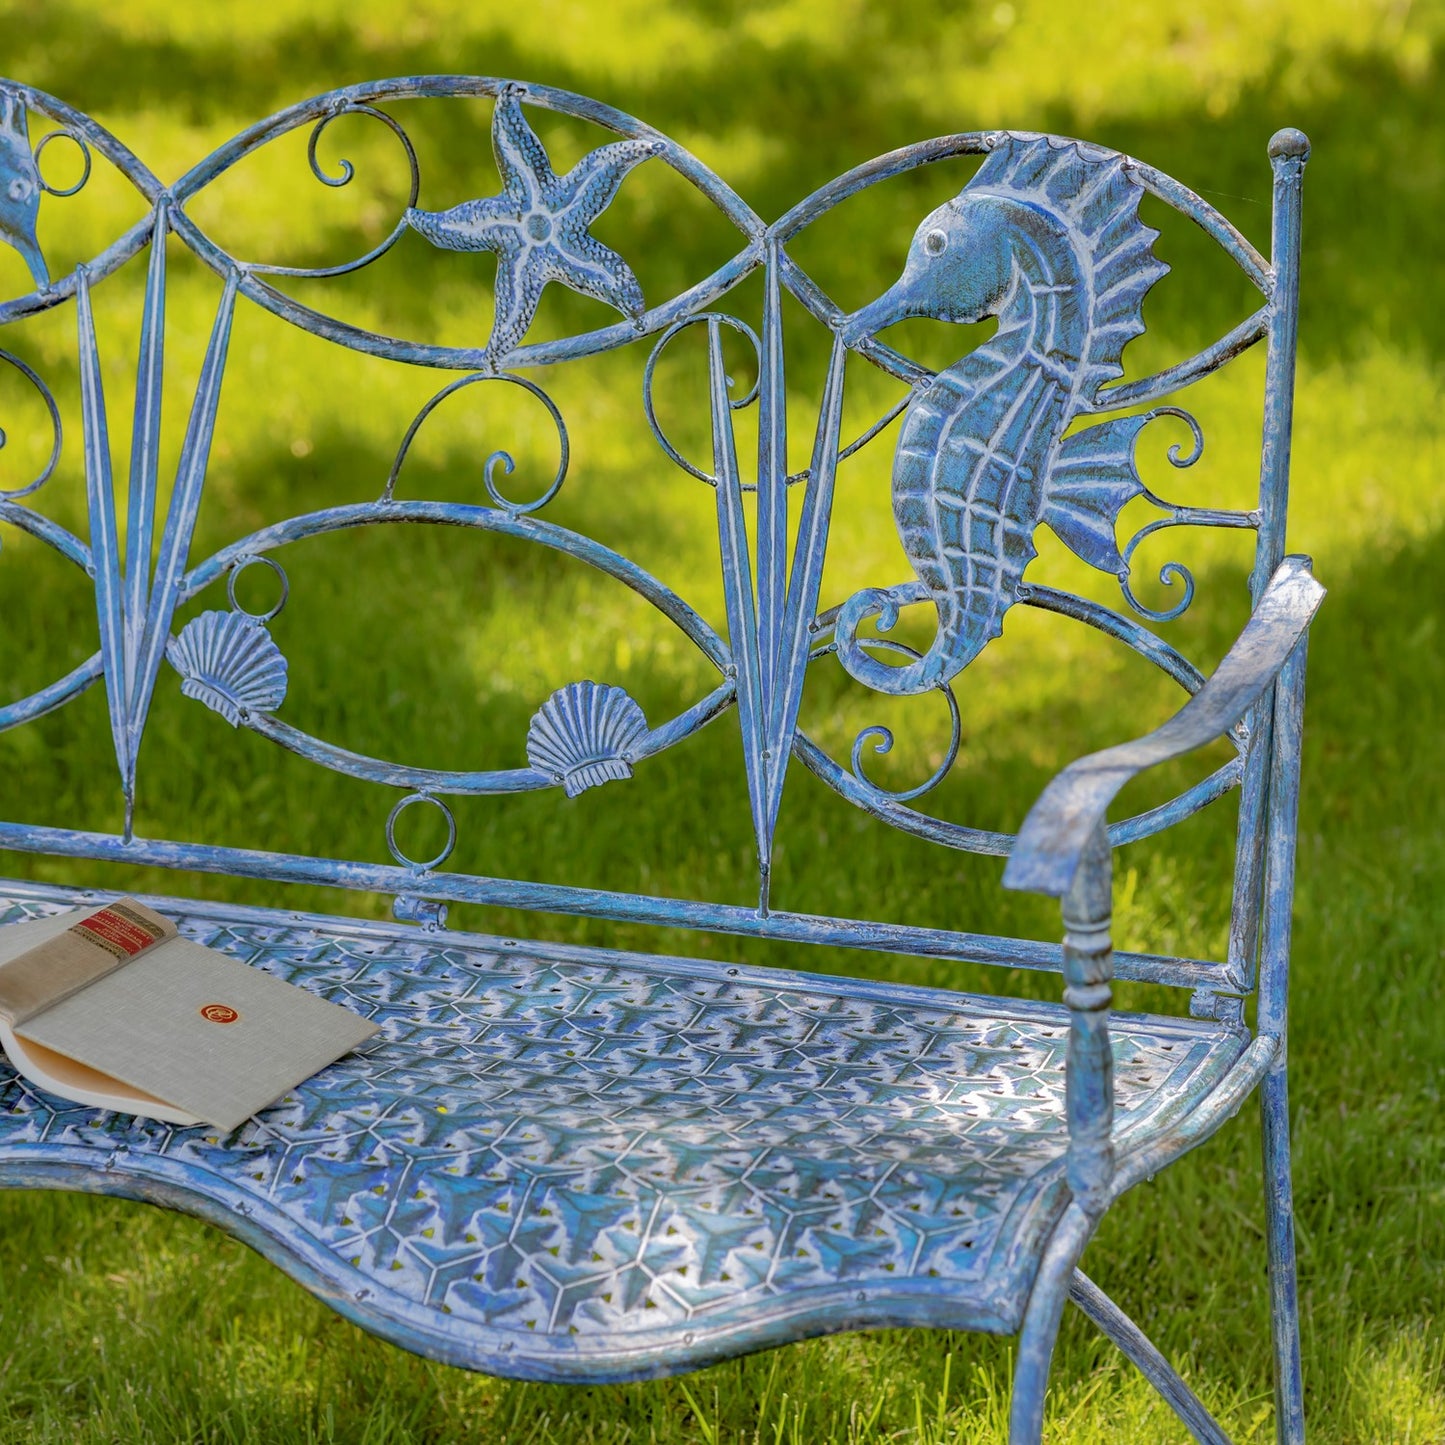 Cozumel Coastal Garden Bench with Seahorse and Starfish